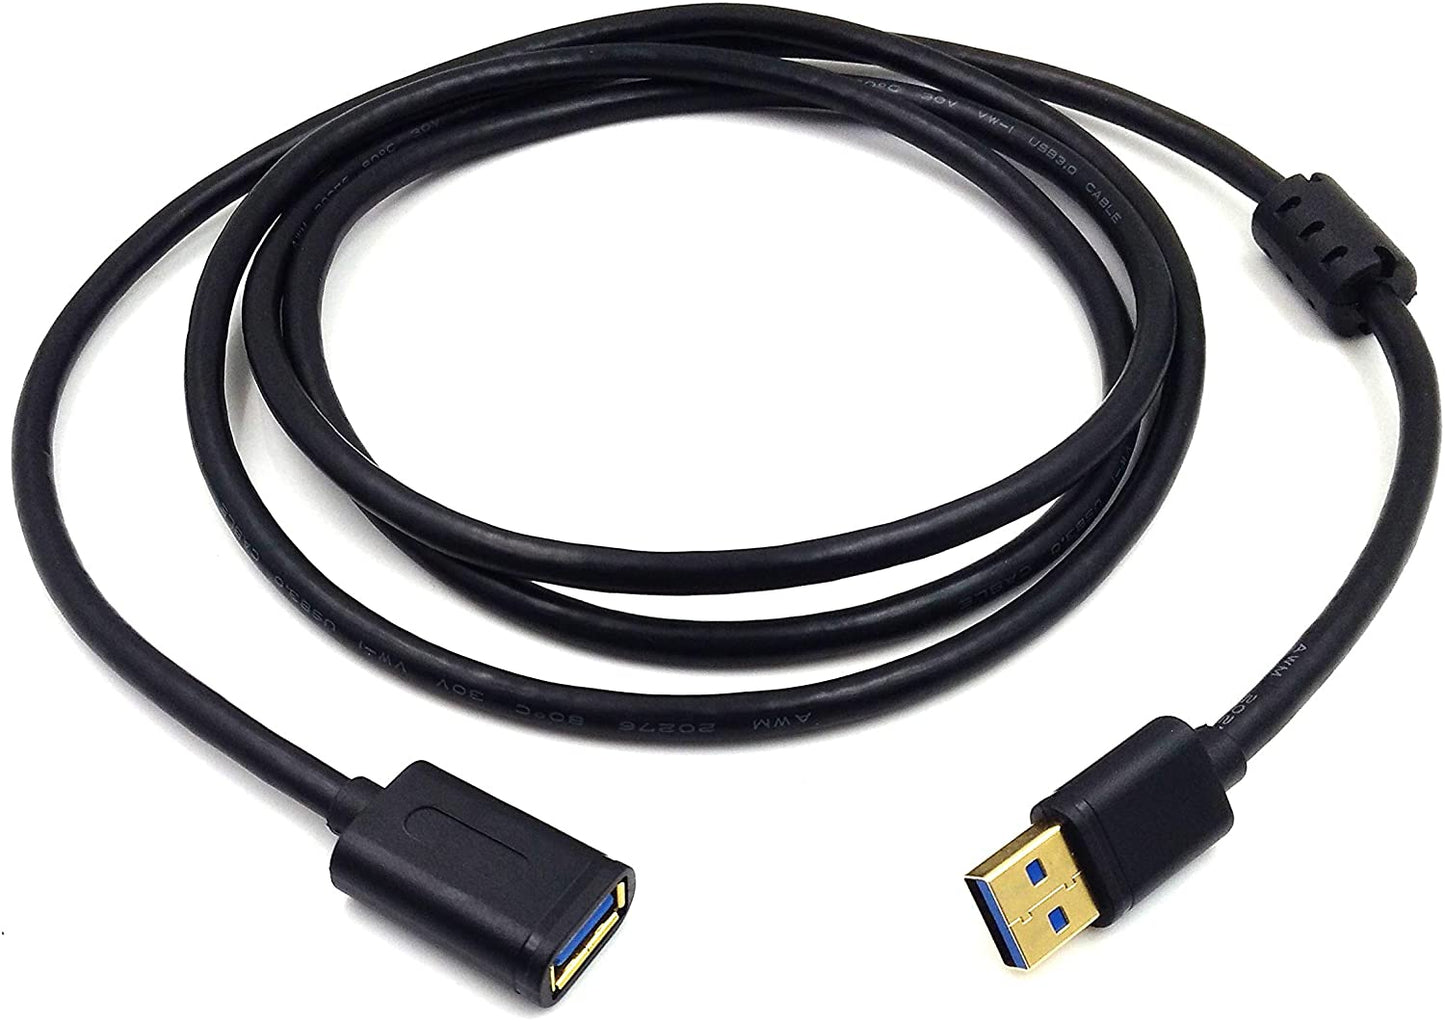 CABLE ASSY, INPUT/OUTPUT USB 3.0 1.8M Information Technology DEX 